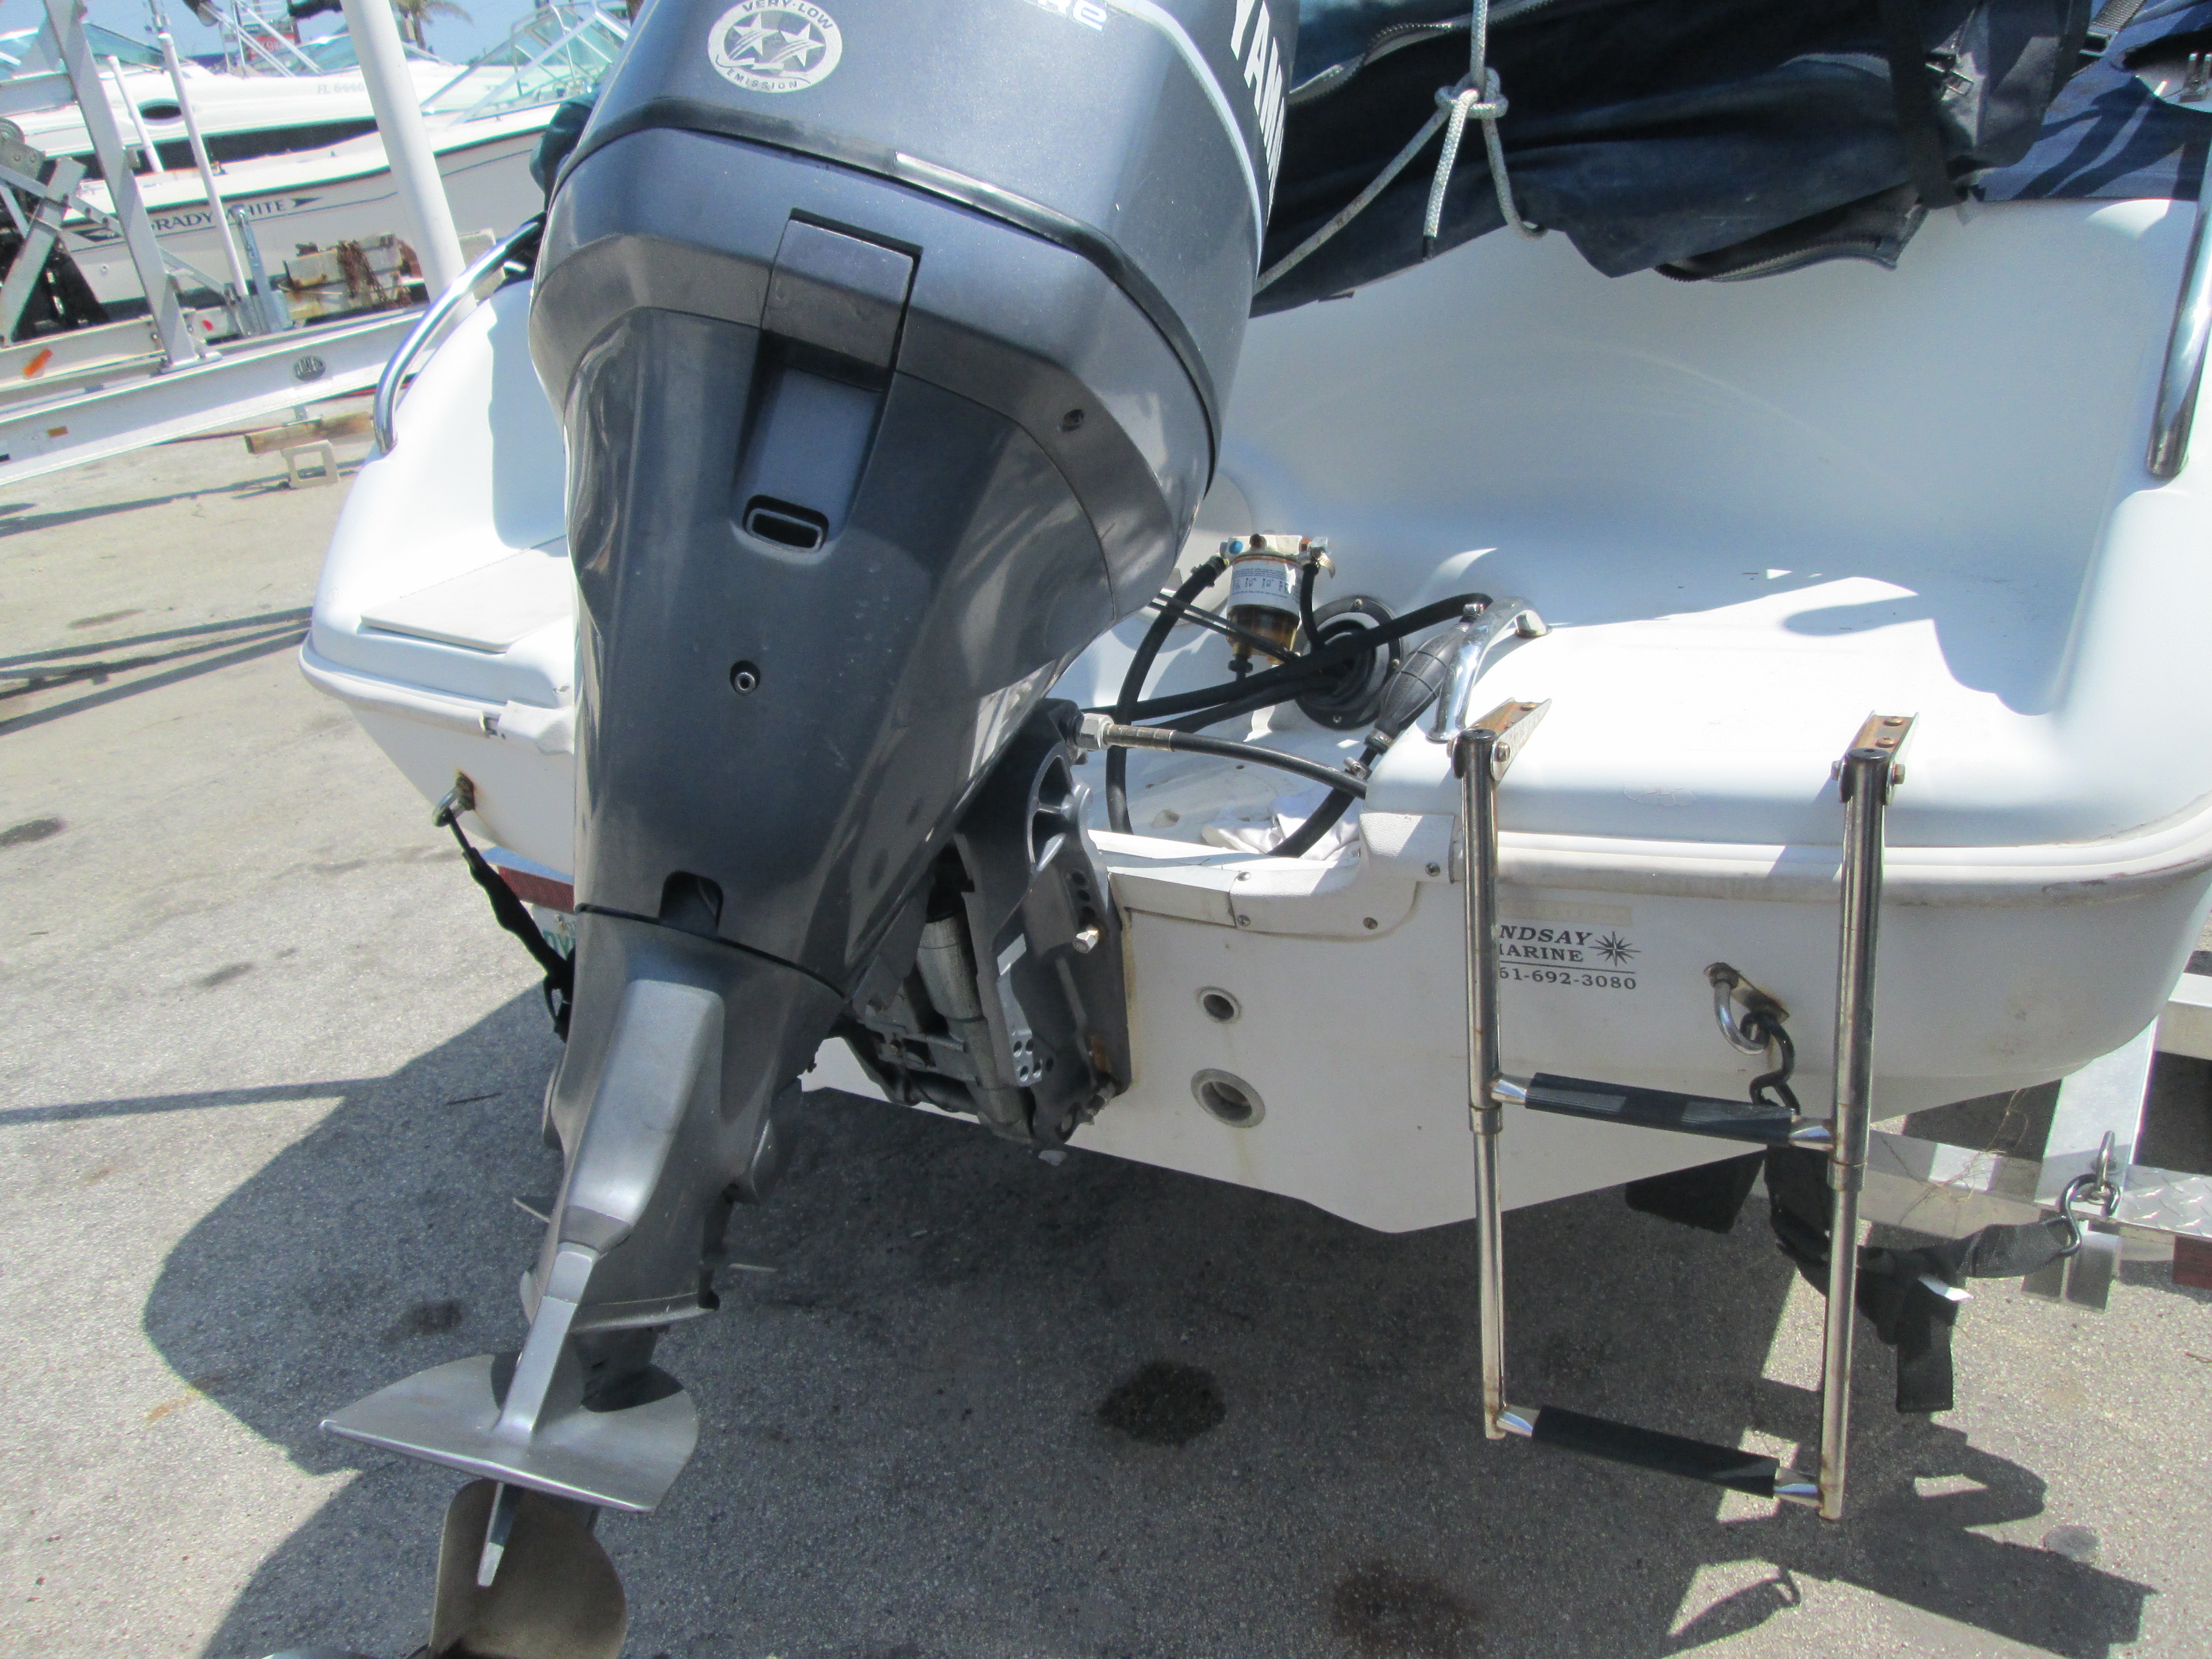 2000 Godfrey Hurricane FD GS 170 Power boat for sale in Hutchinson Is, FL - image 3 